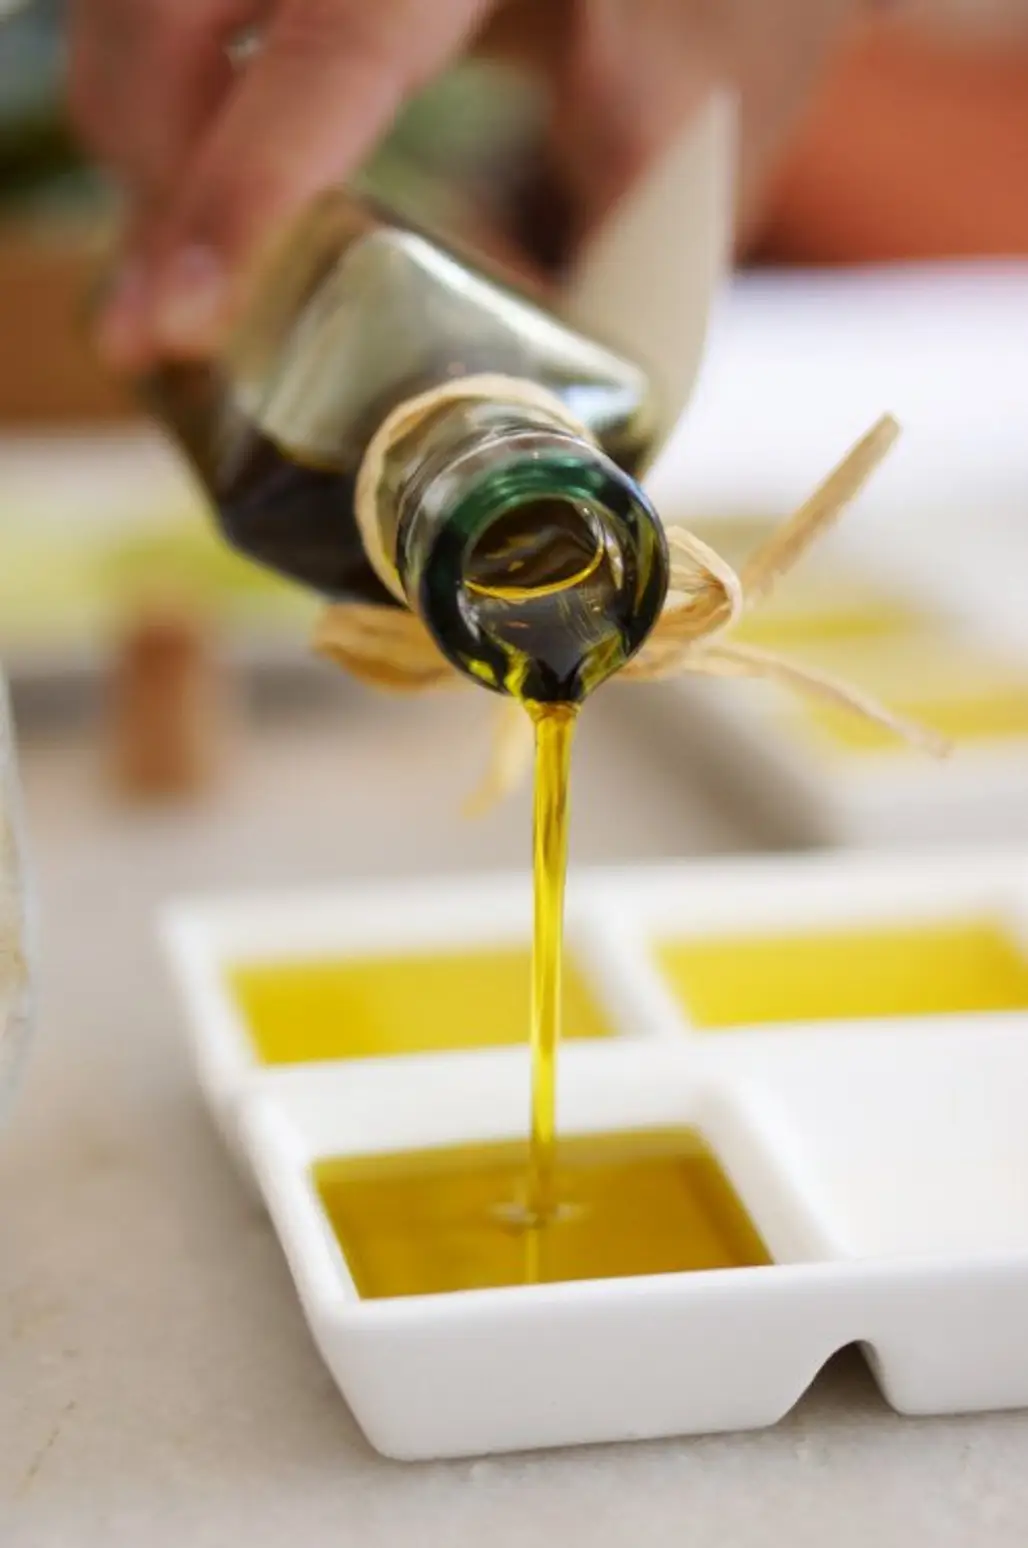 Try Cooking with Olive Oil